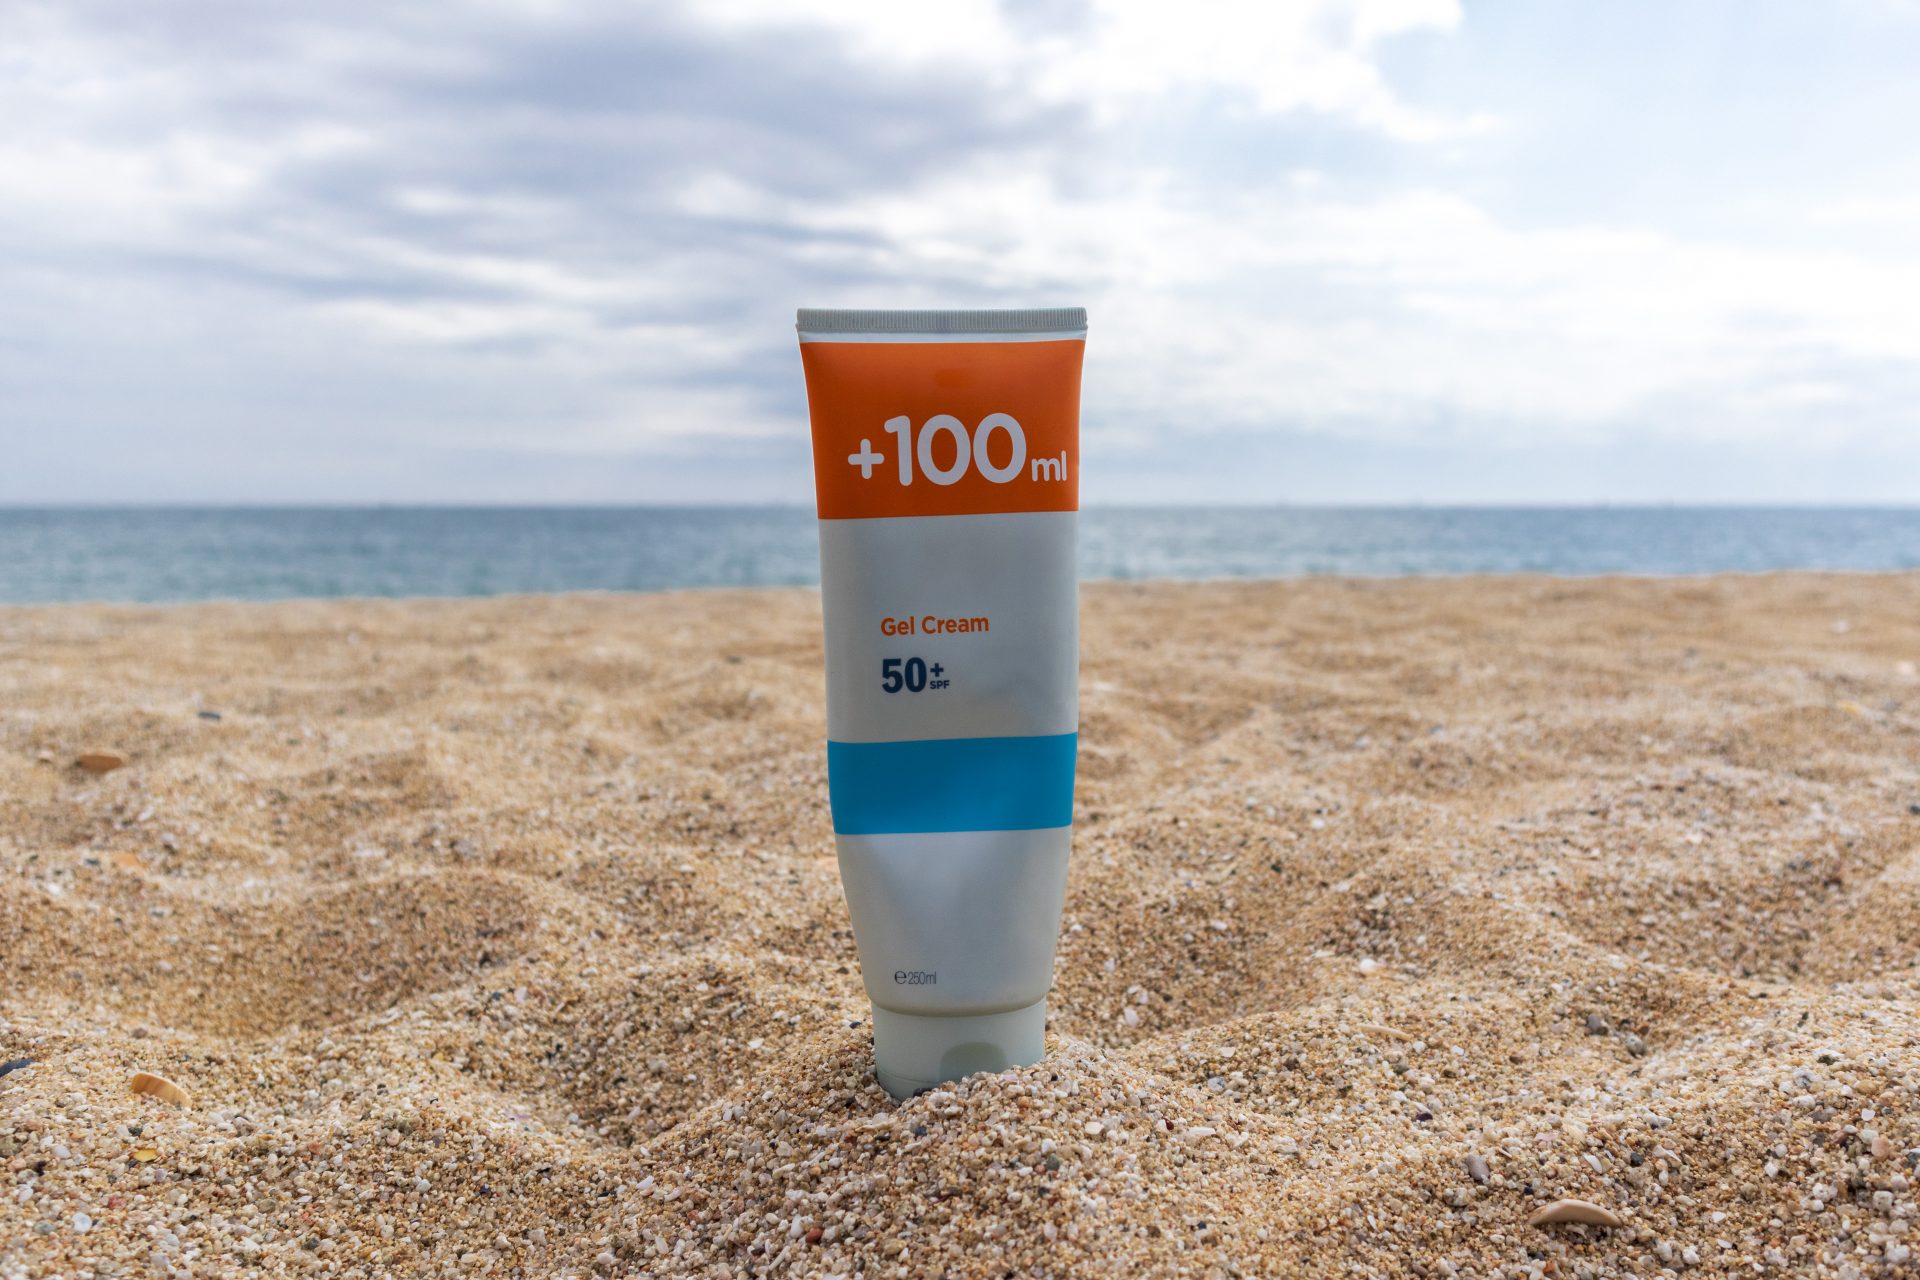 The health and environmental impacts of sunscreen